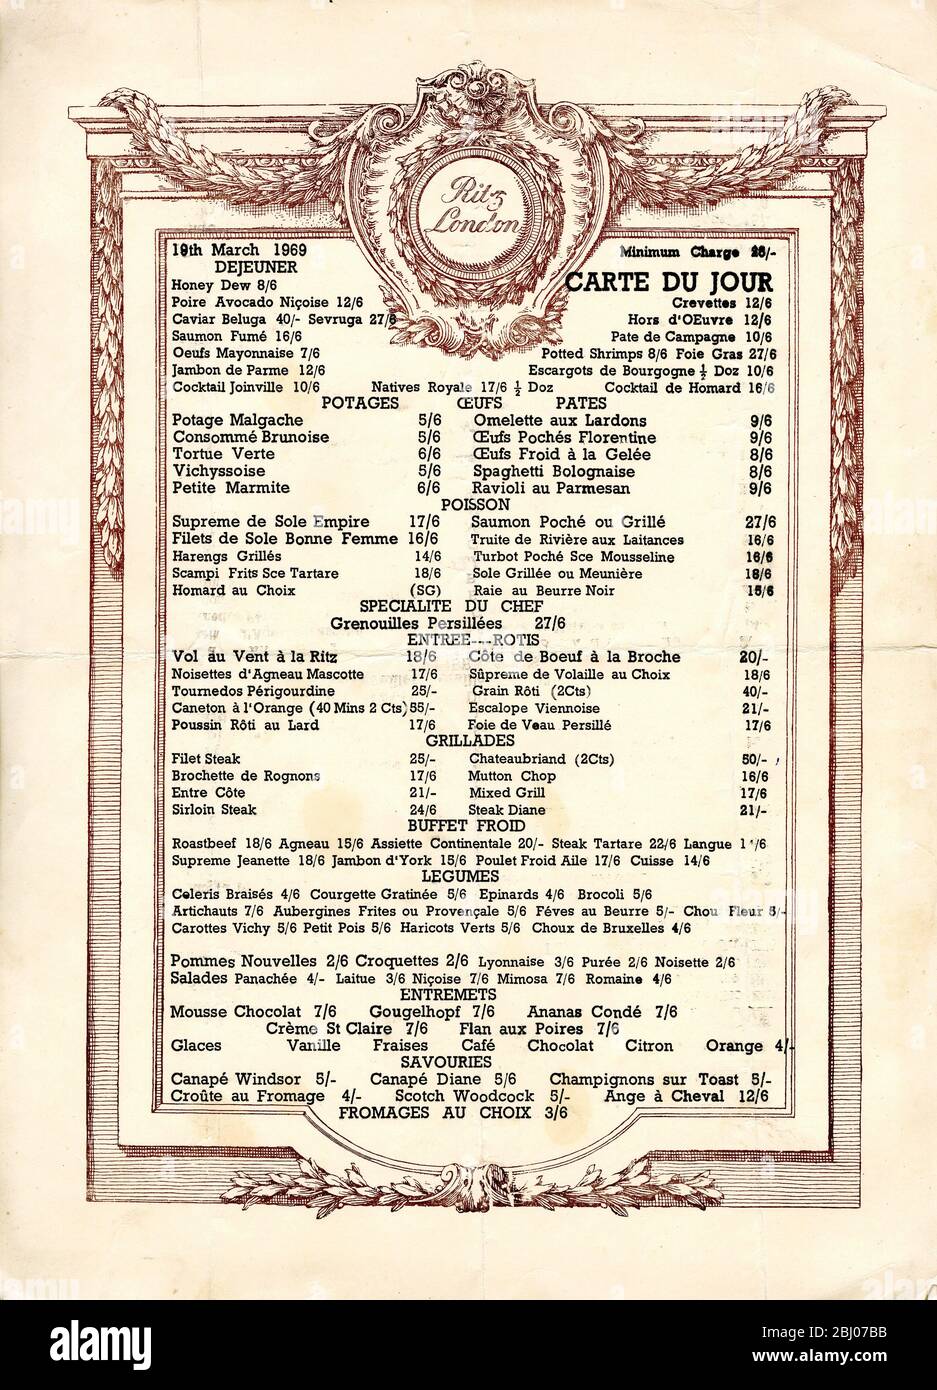 Carrier Collection of Menus - The Ritz - 19 March 1969 - Piccadilly, London, England Stock Photo